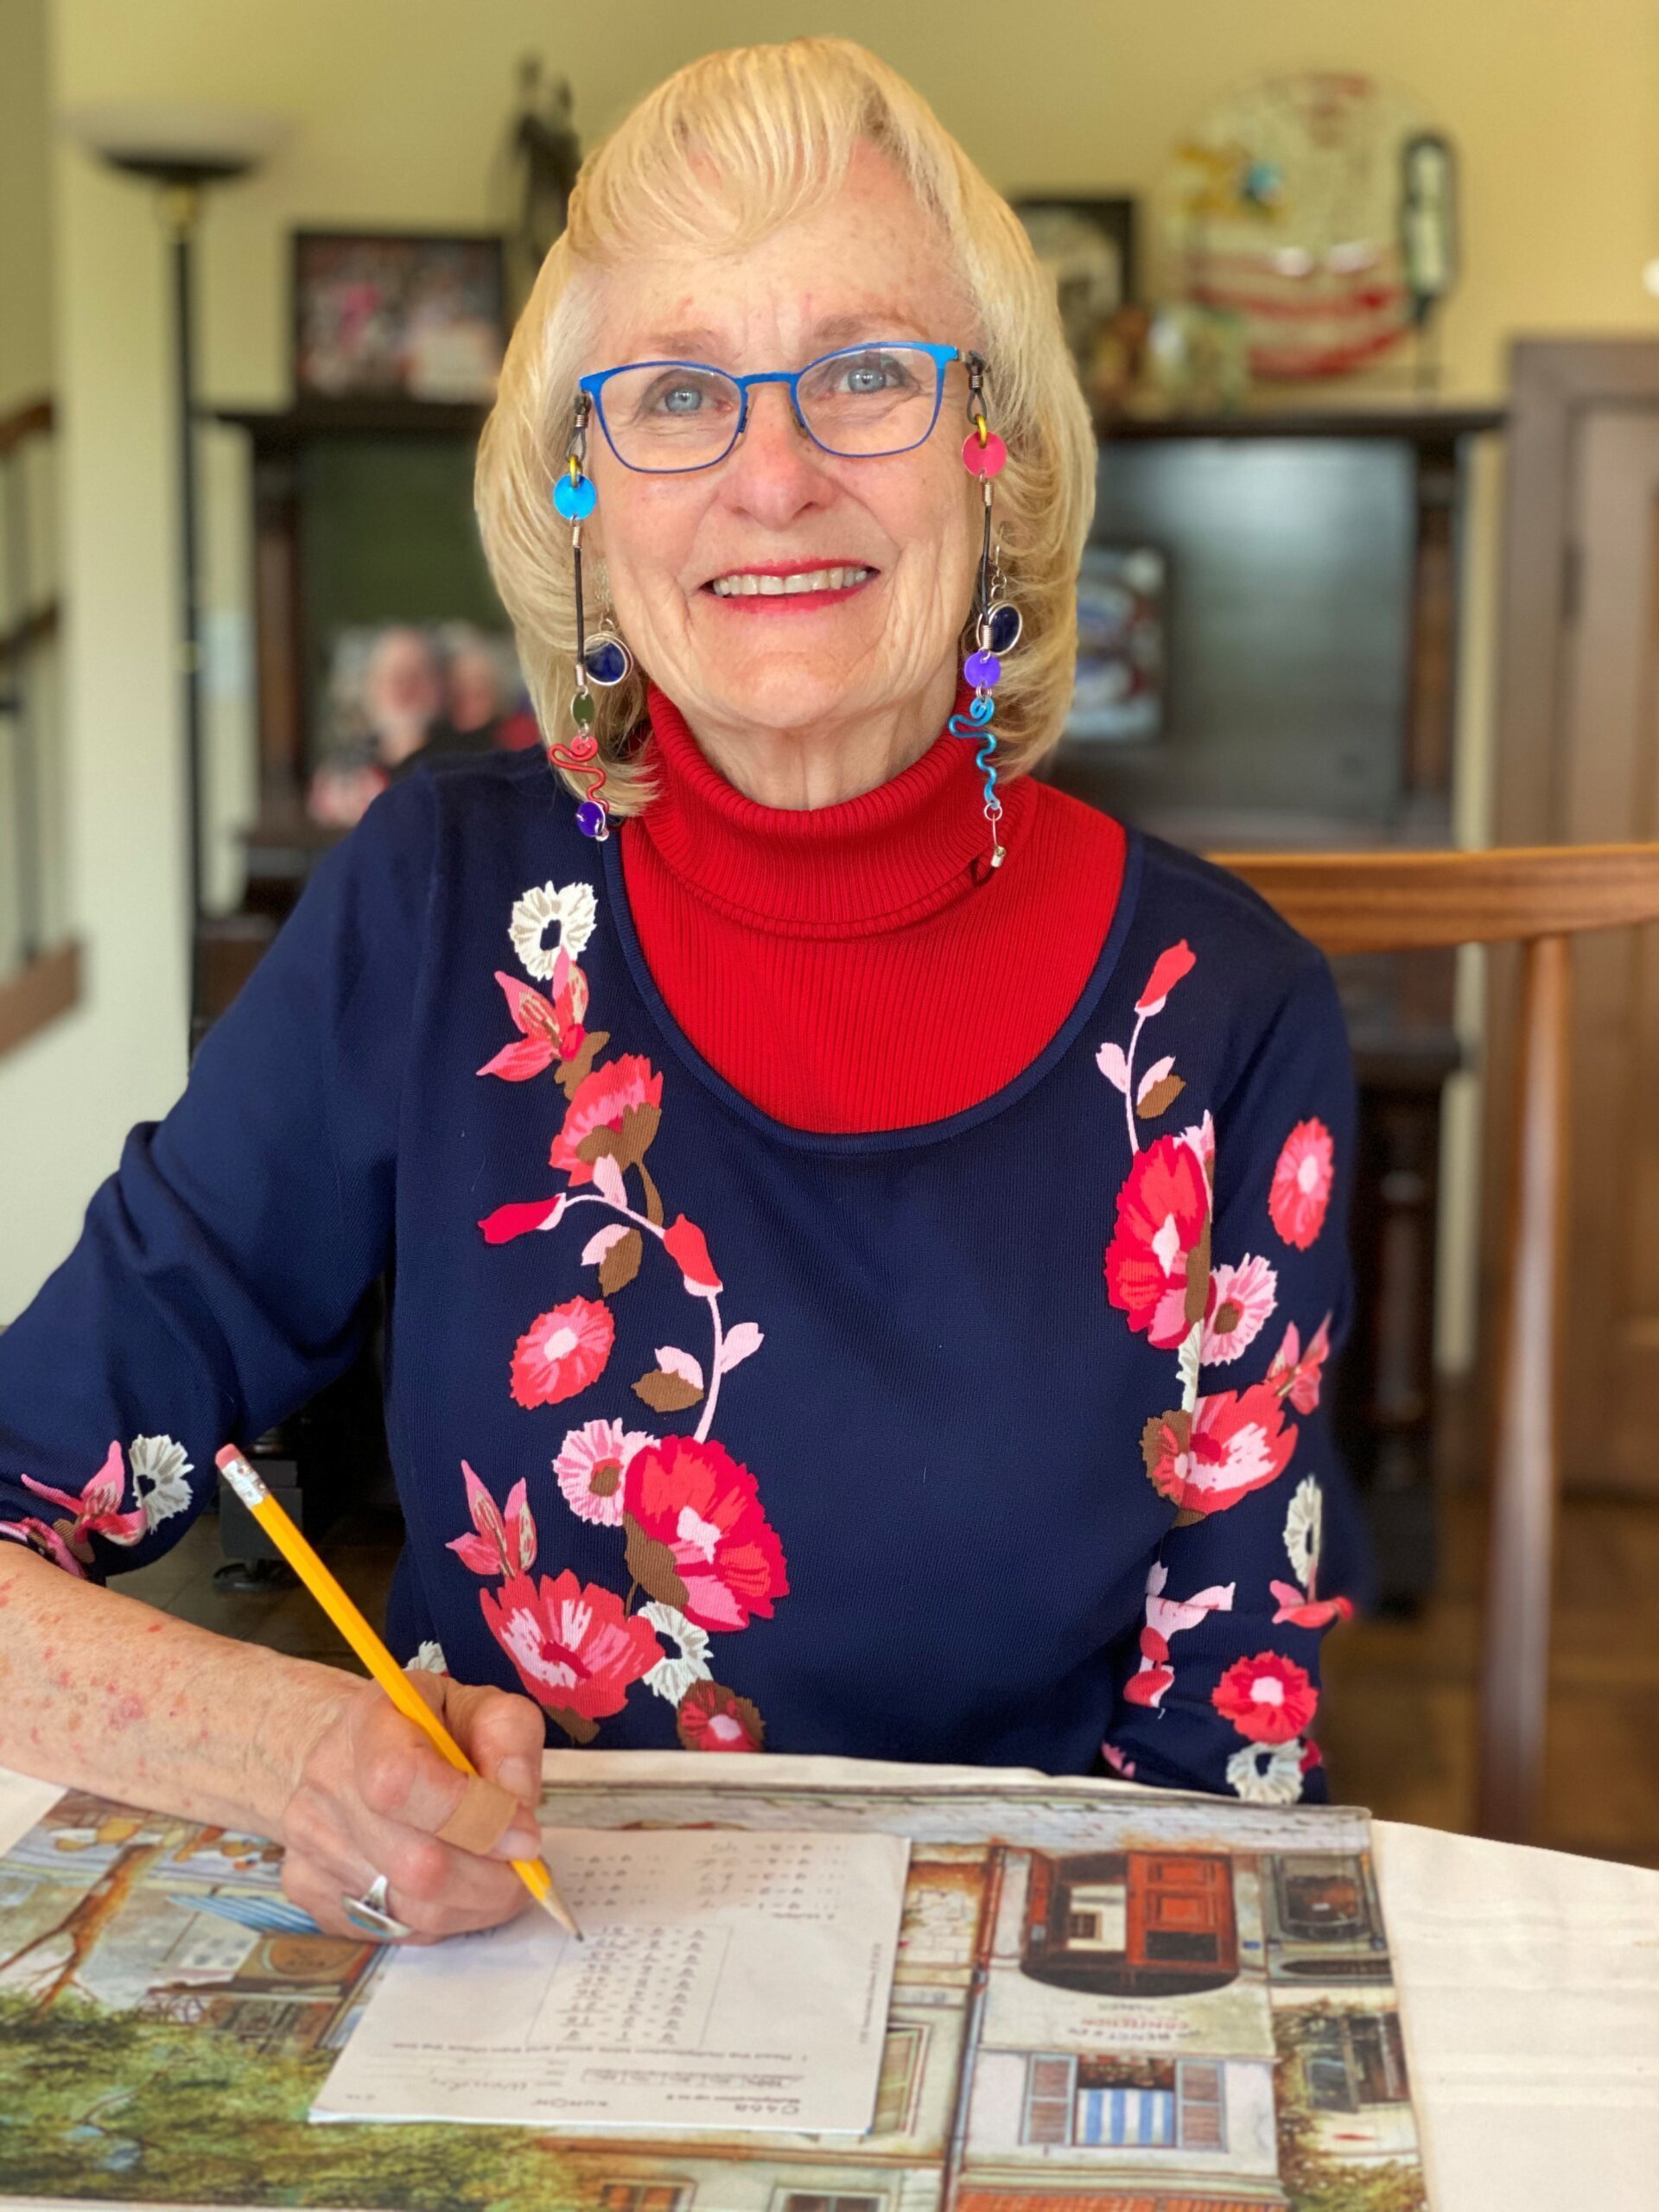 photo of an older woman in glasses. She is smiling as she works on a writing task